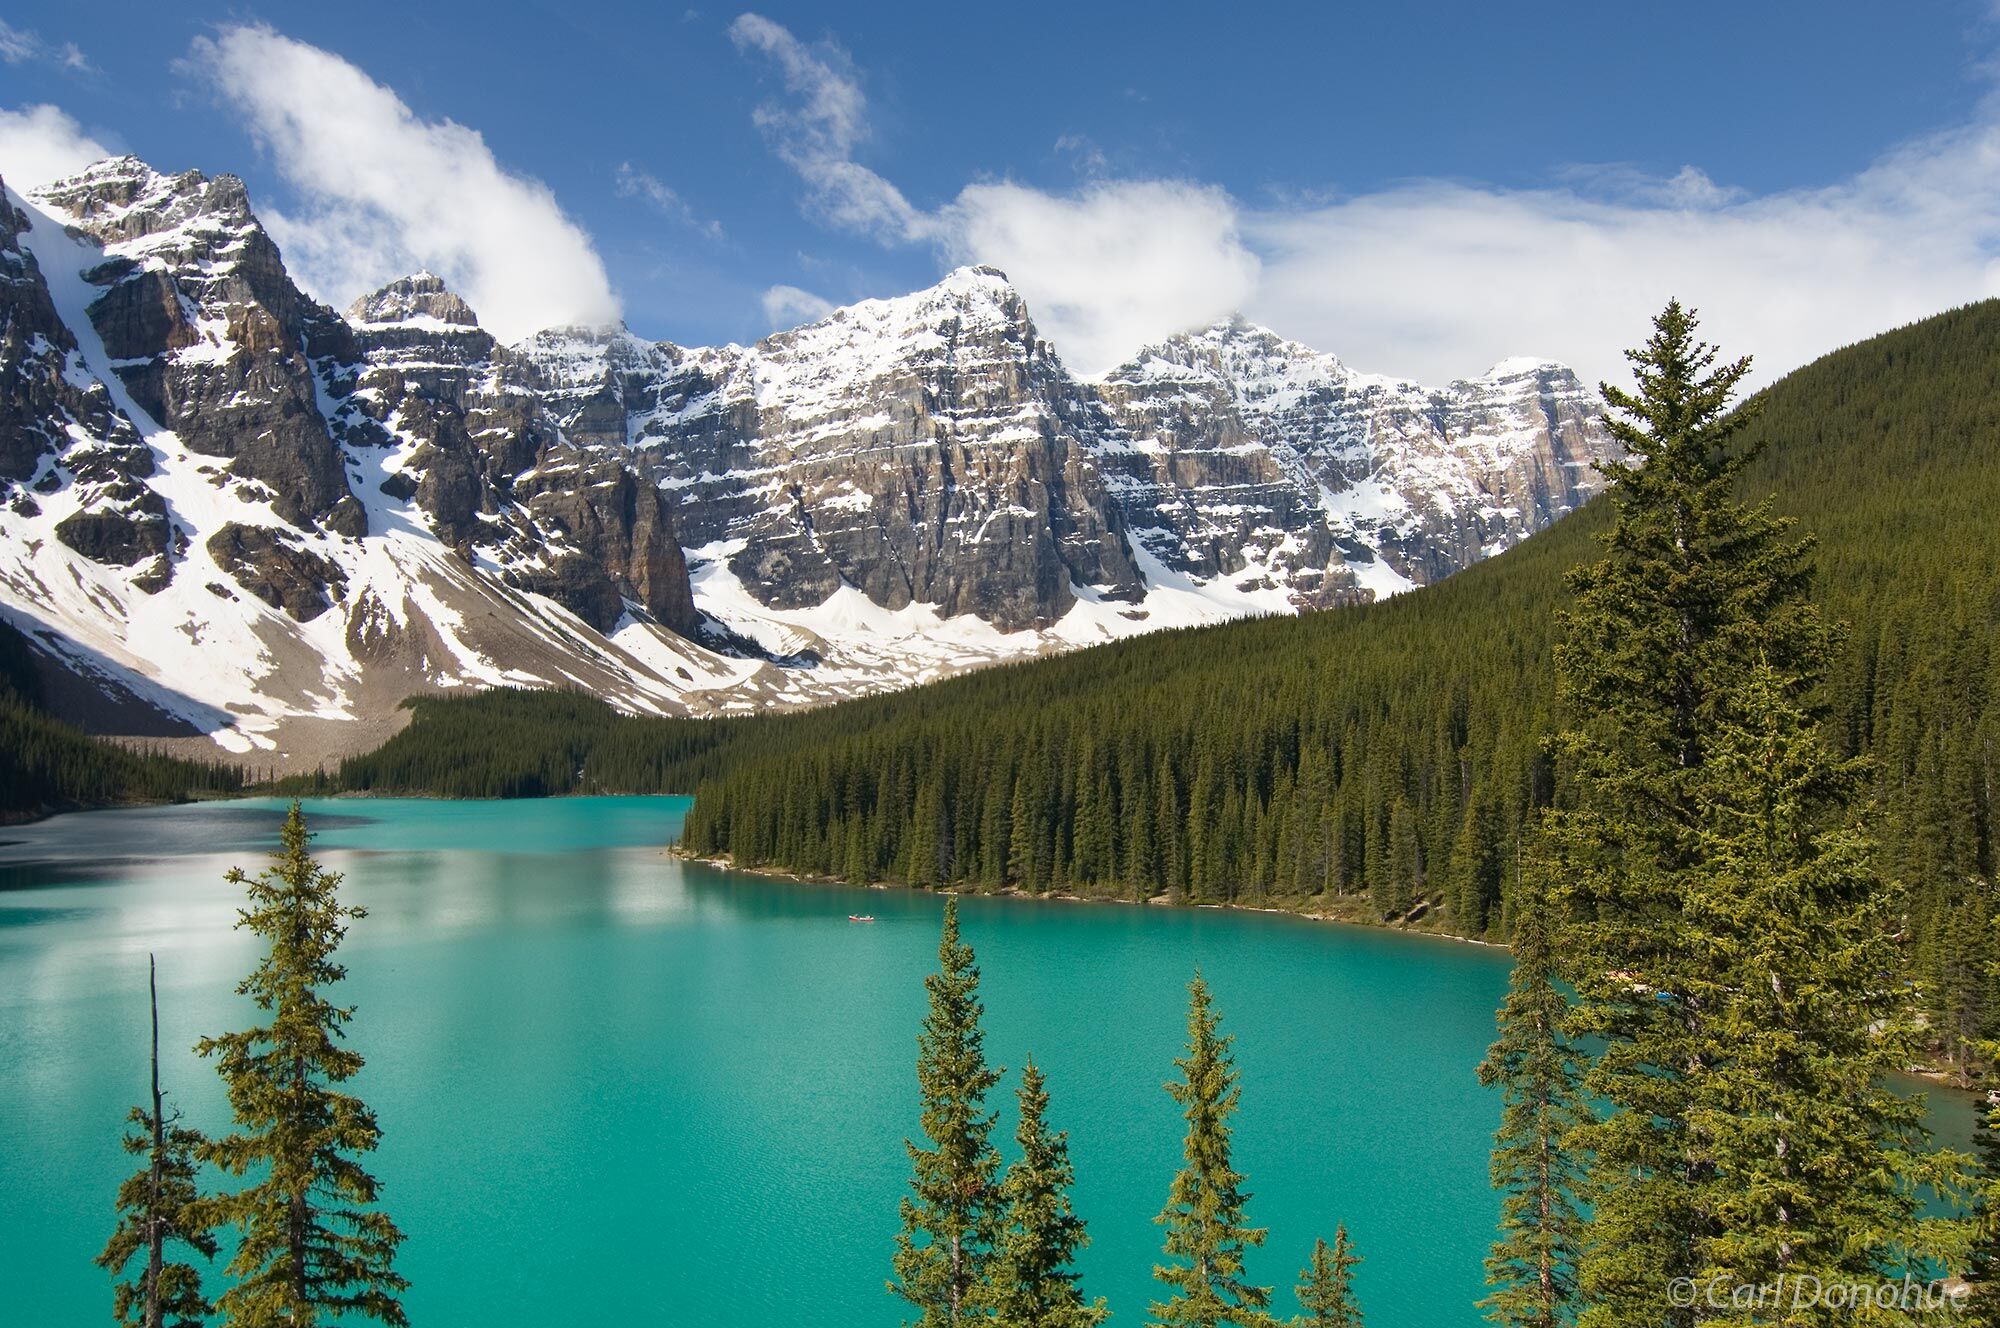 Moraine Lake, reflections and pine forest, Canadian Rockies, Banff National Park, Alberta, Canada.